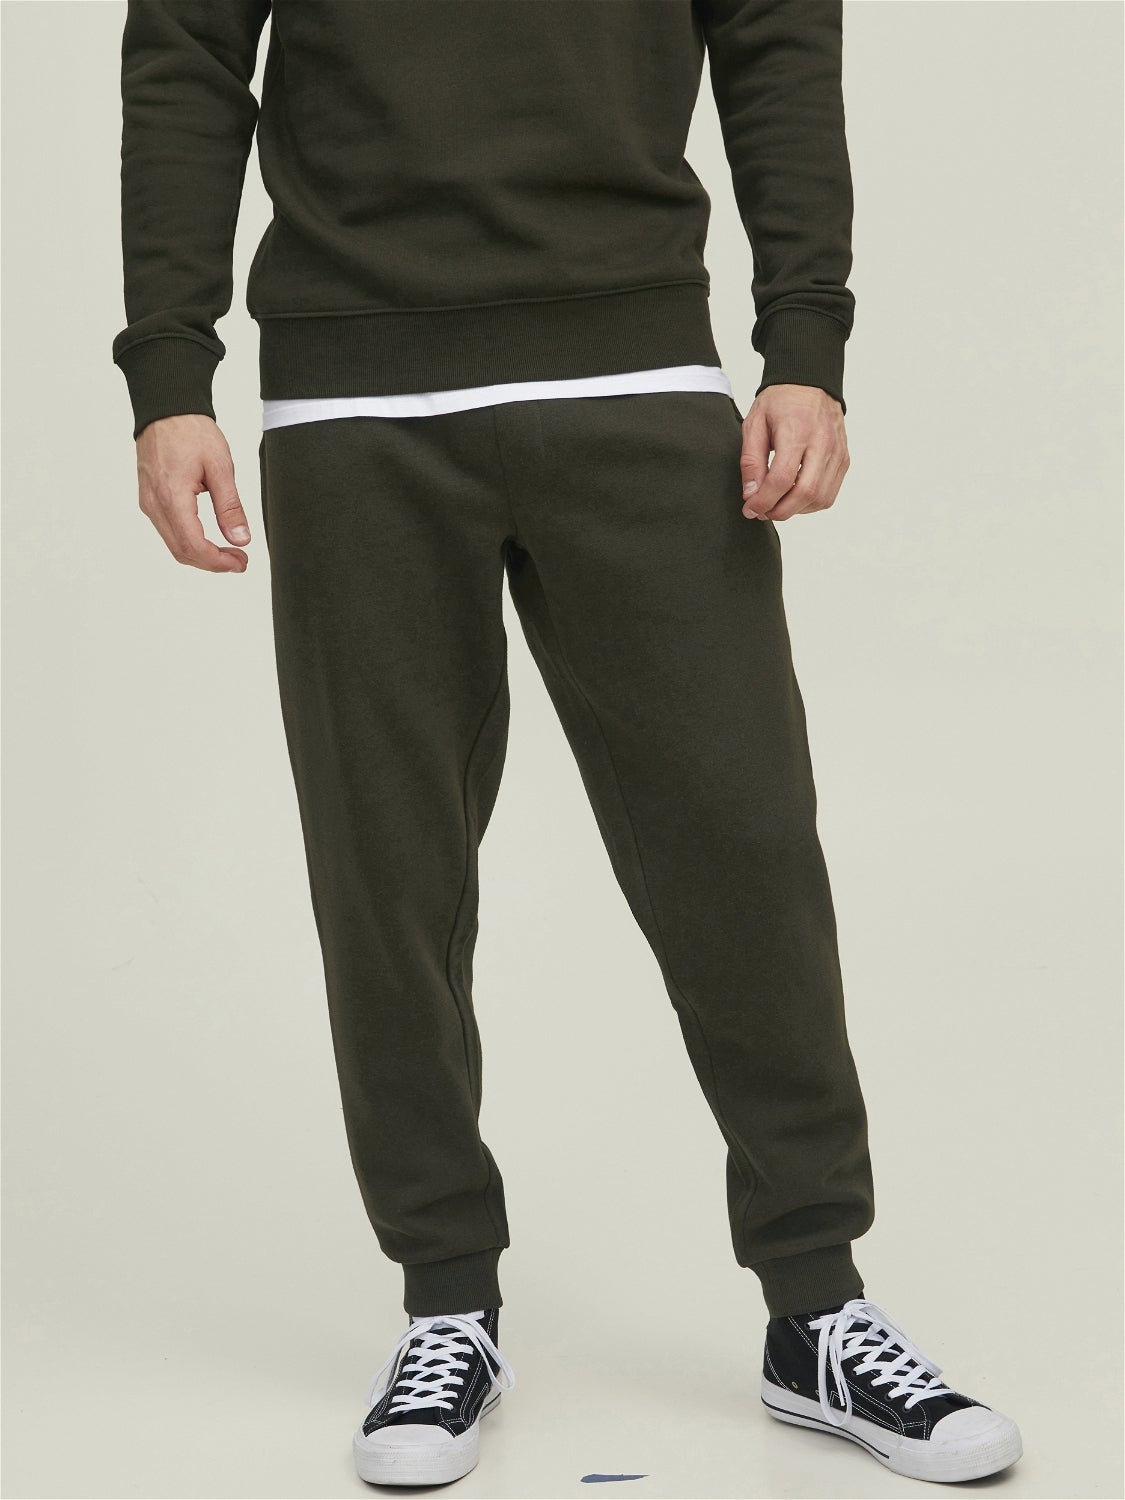 discount 56% MEN FASHION Trousers Sports Gray L Jack & Jones tracksuit and joggers 